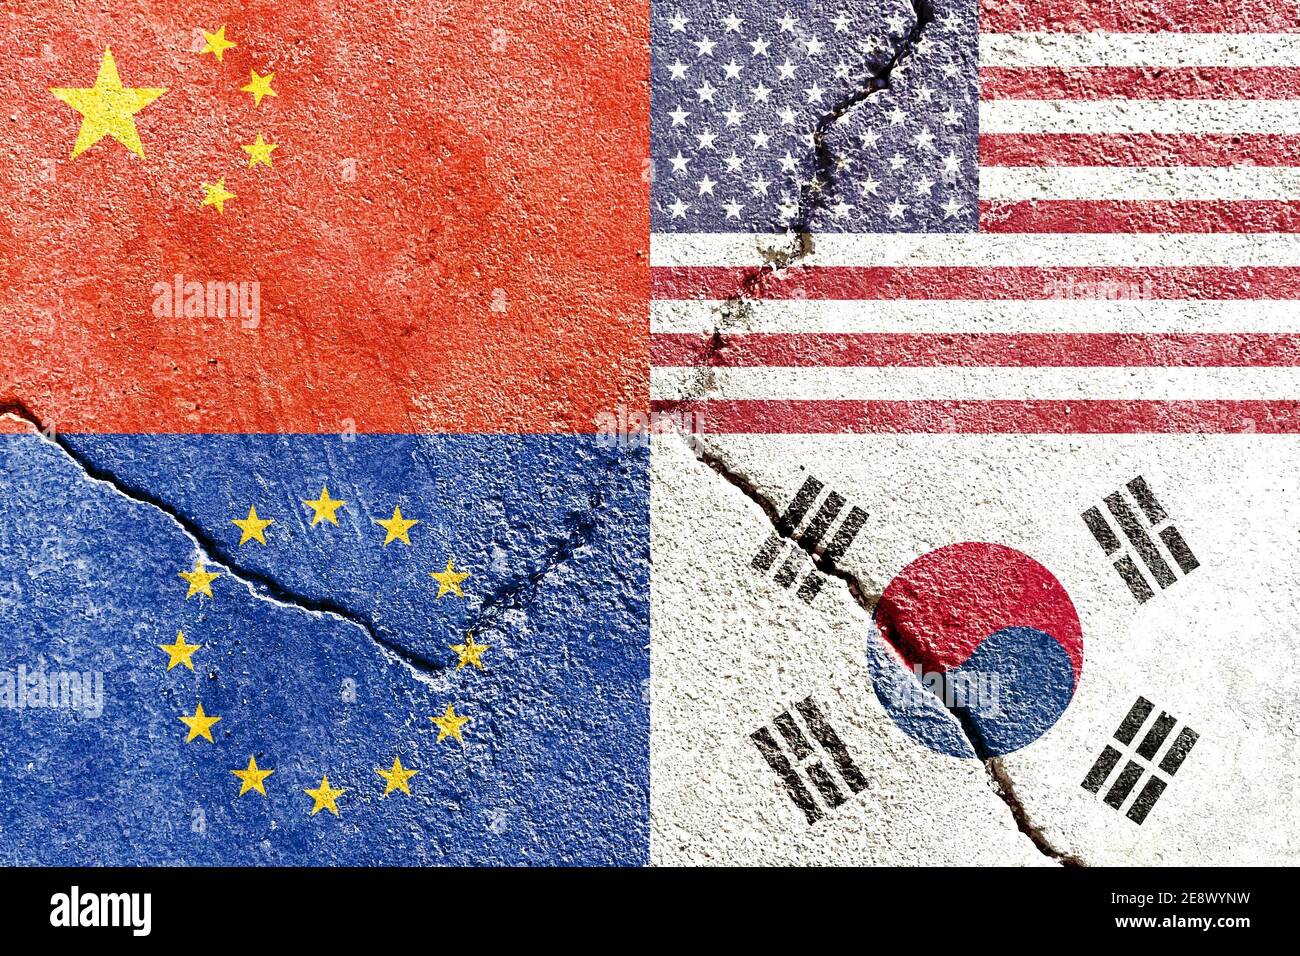 Closeup of USA, China, EU, and South Korea flags on weathered and cracked wall background Stock Photo